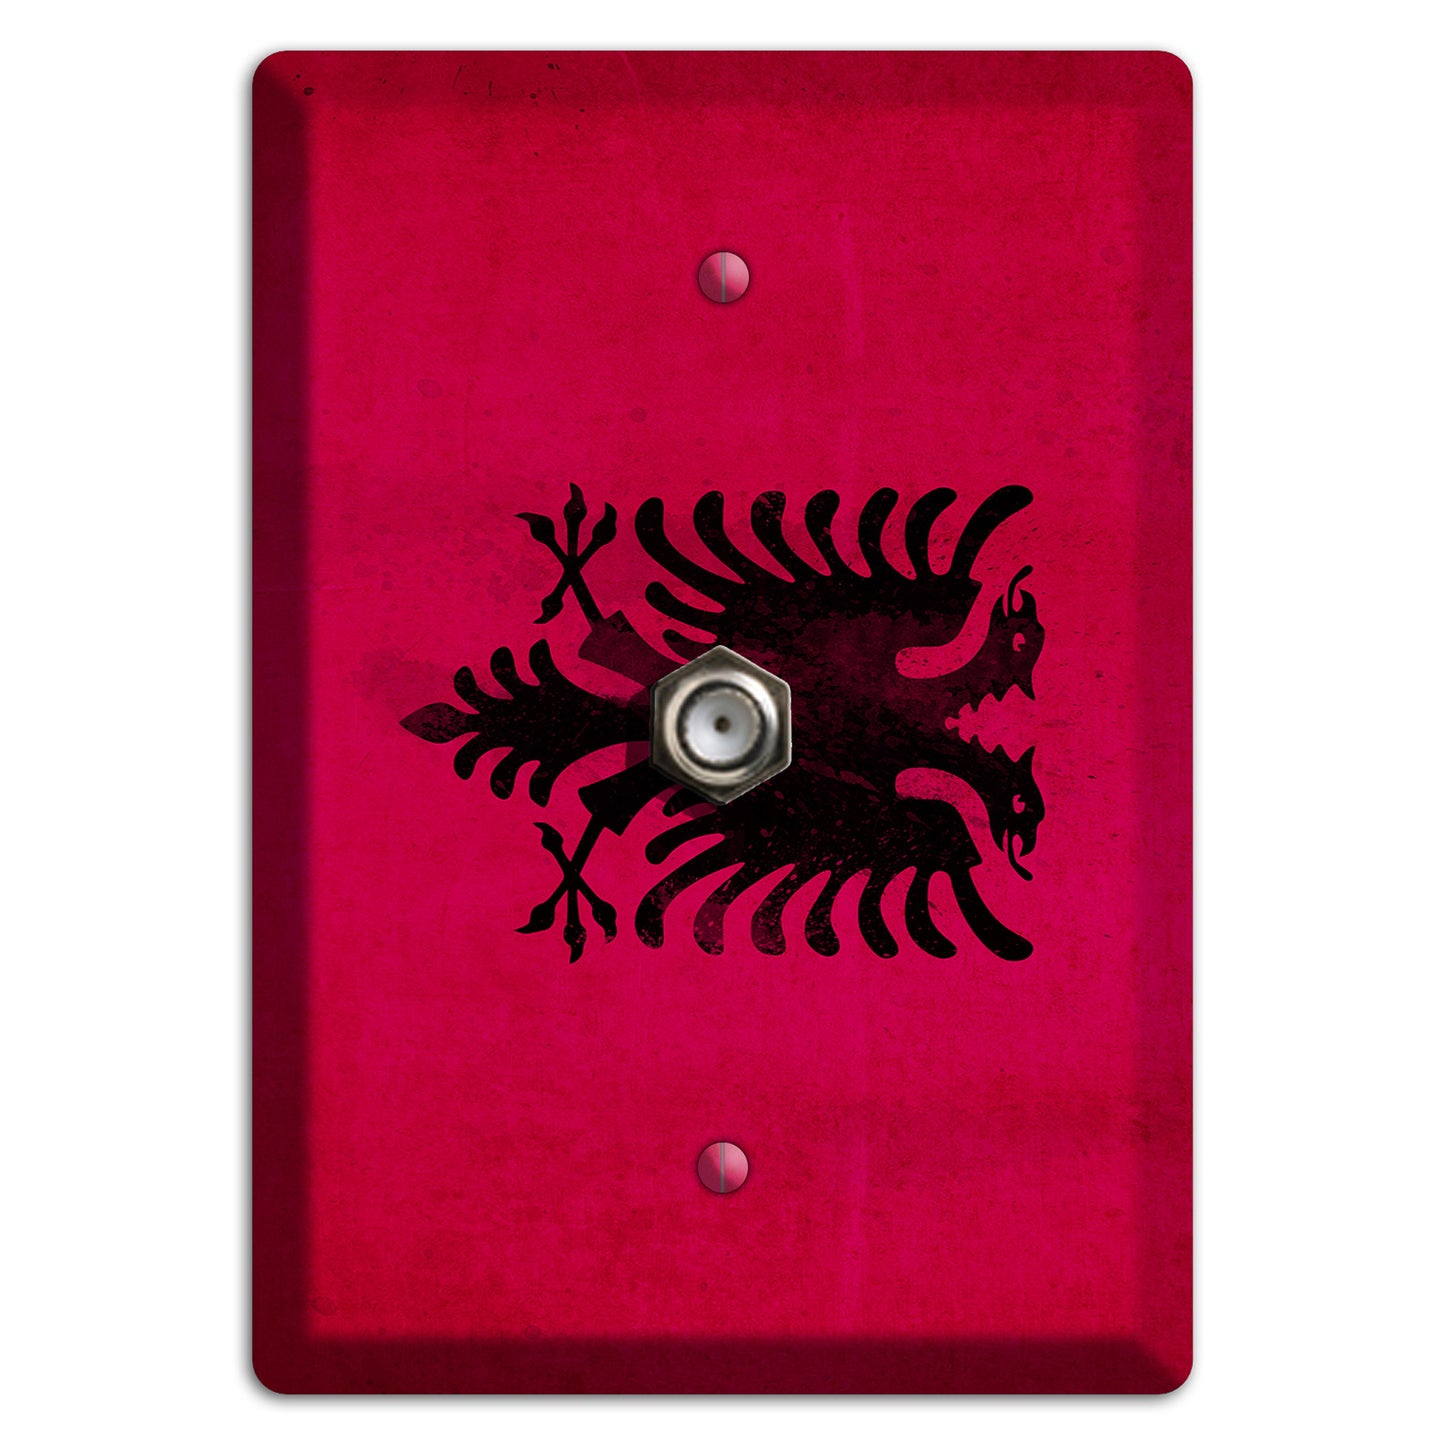 Albania Cover Plates Cable Wallplate